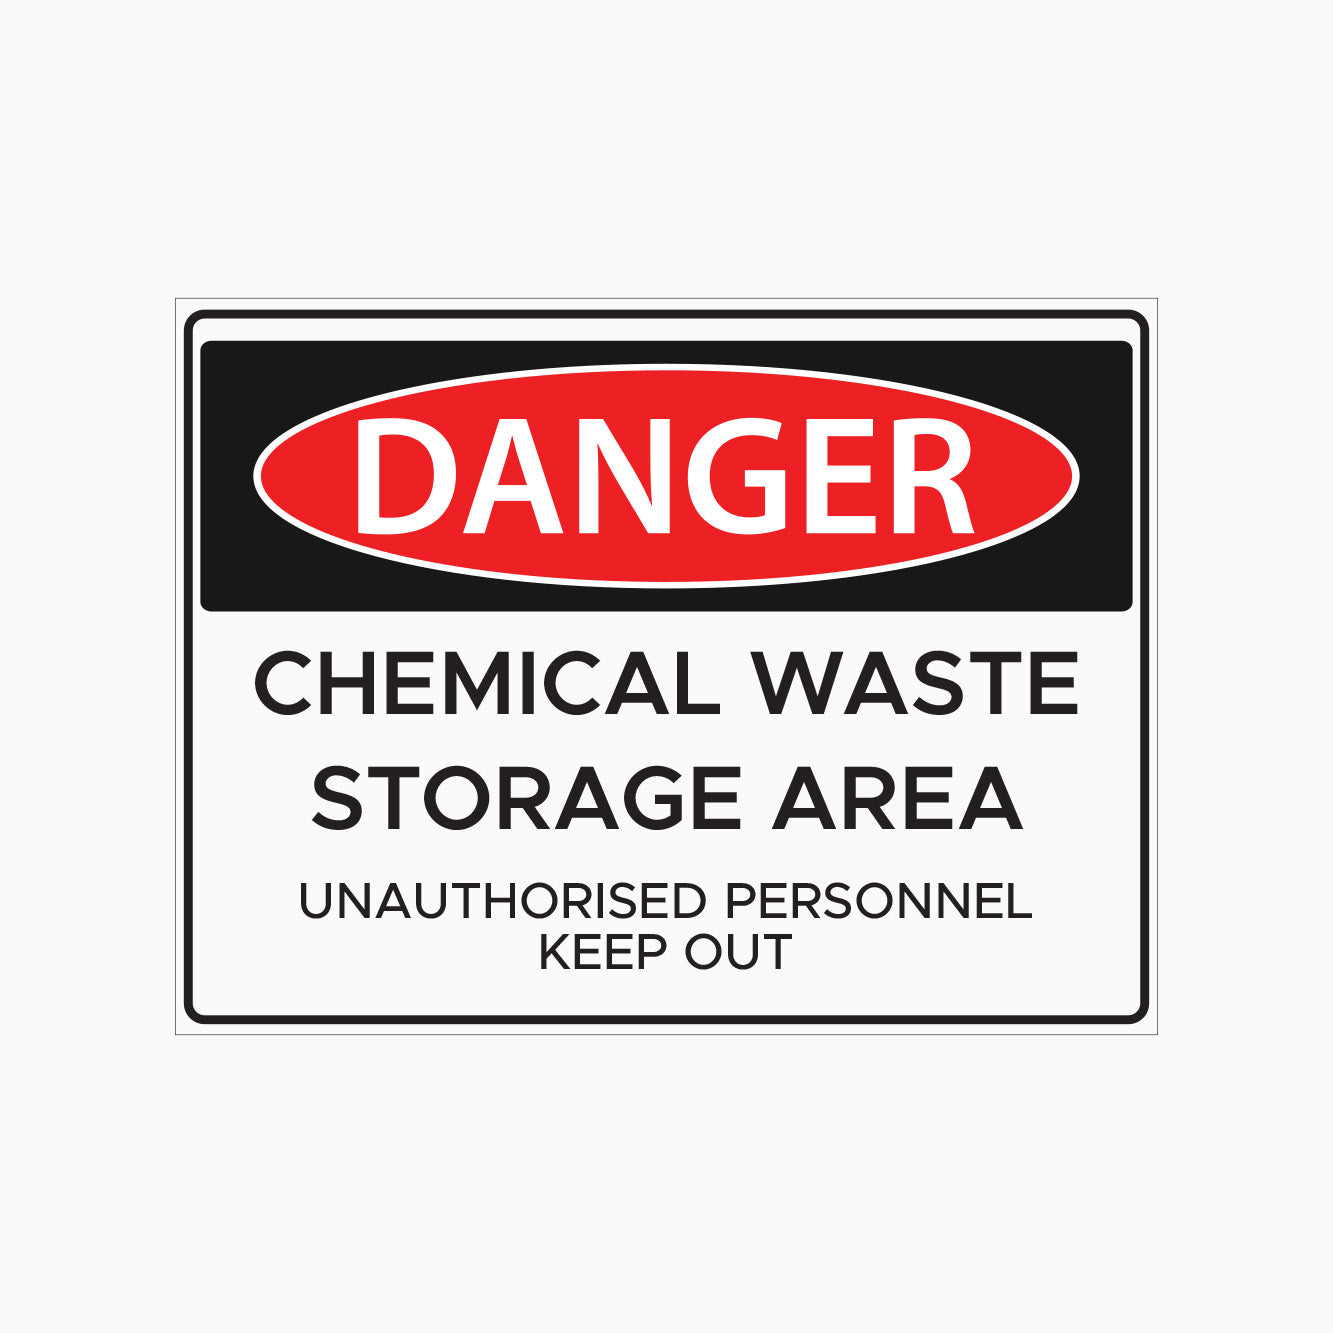 DANGER SIGN - CHEMICAL WASTE STORAGE AREA SIGN - UNAUTHORISED PERSONNEL KEEP OUT SIGN